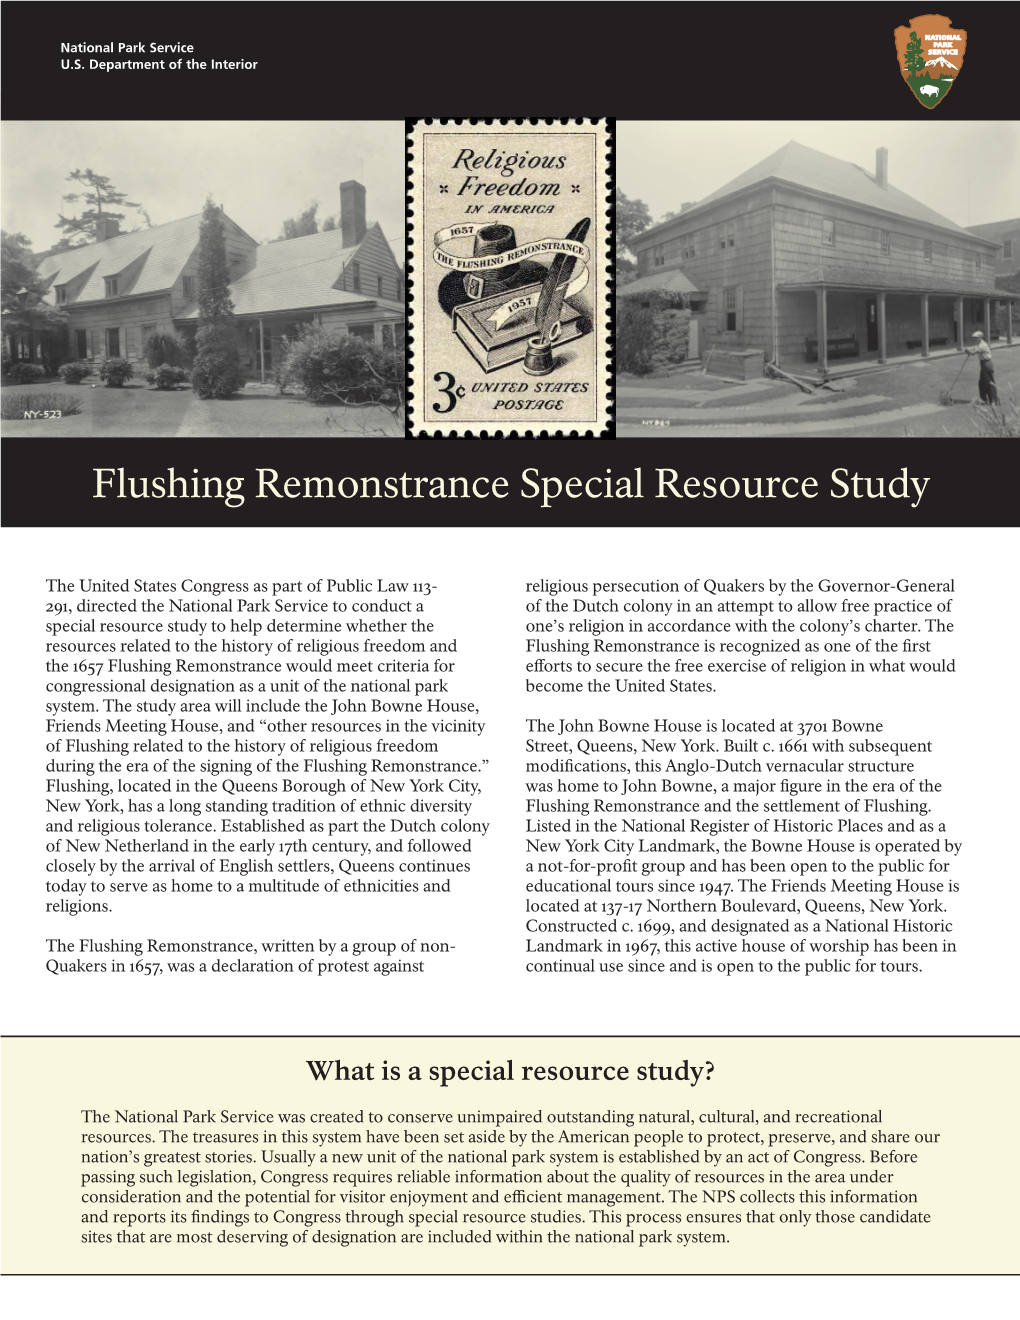 Flushing Remonstrance Special Resource Study